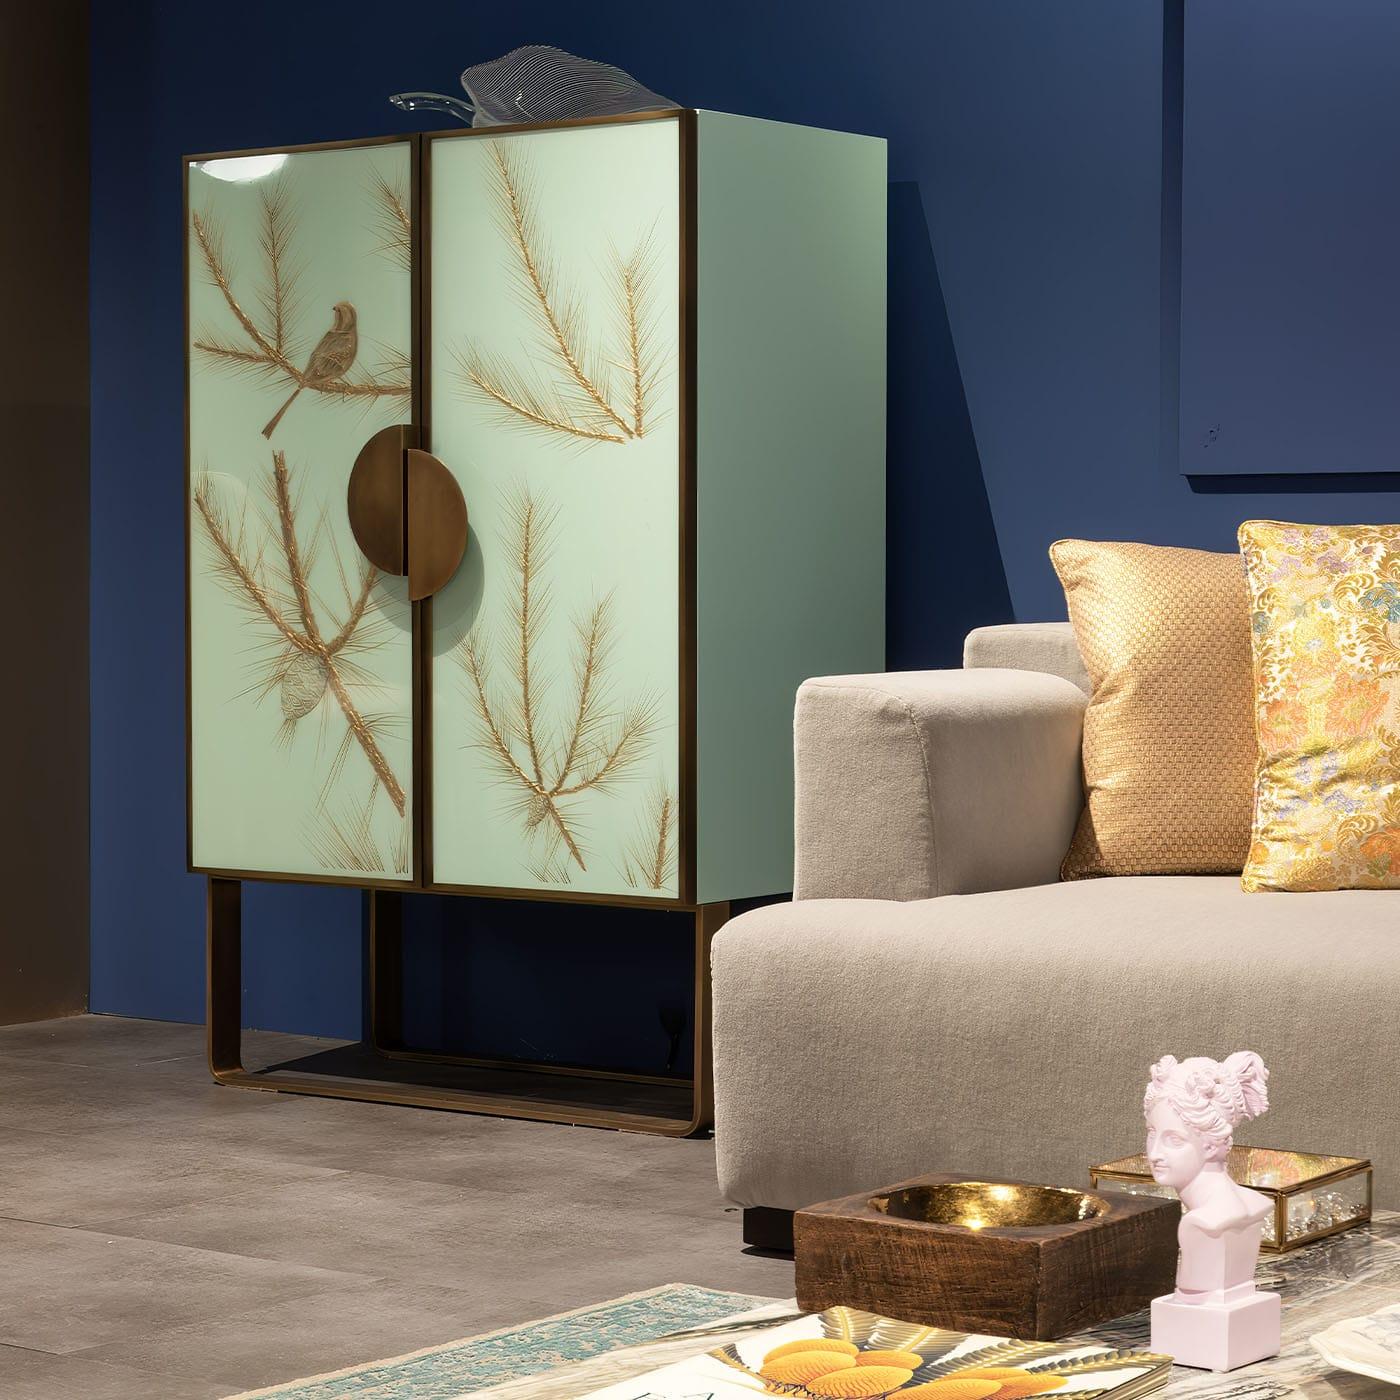 An authentic work of art, this limited-edition bar cabinet amazes with its evocative design. A sleigh base - that shares with the handles the same elegant bronzed finish - guides the eye to the doors' raised decoration of a bird perched on twigs